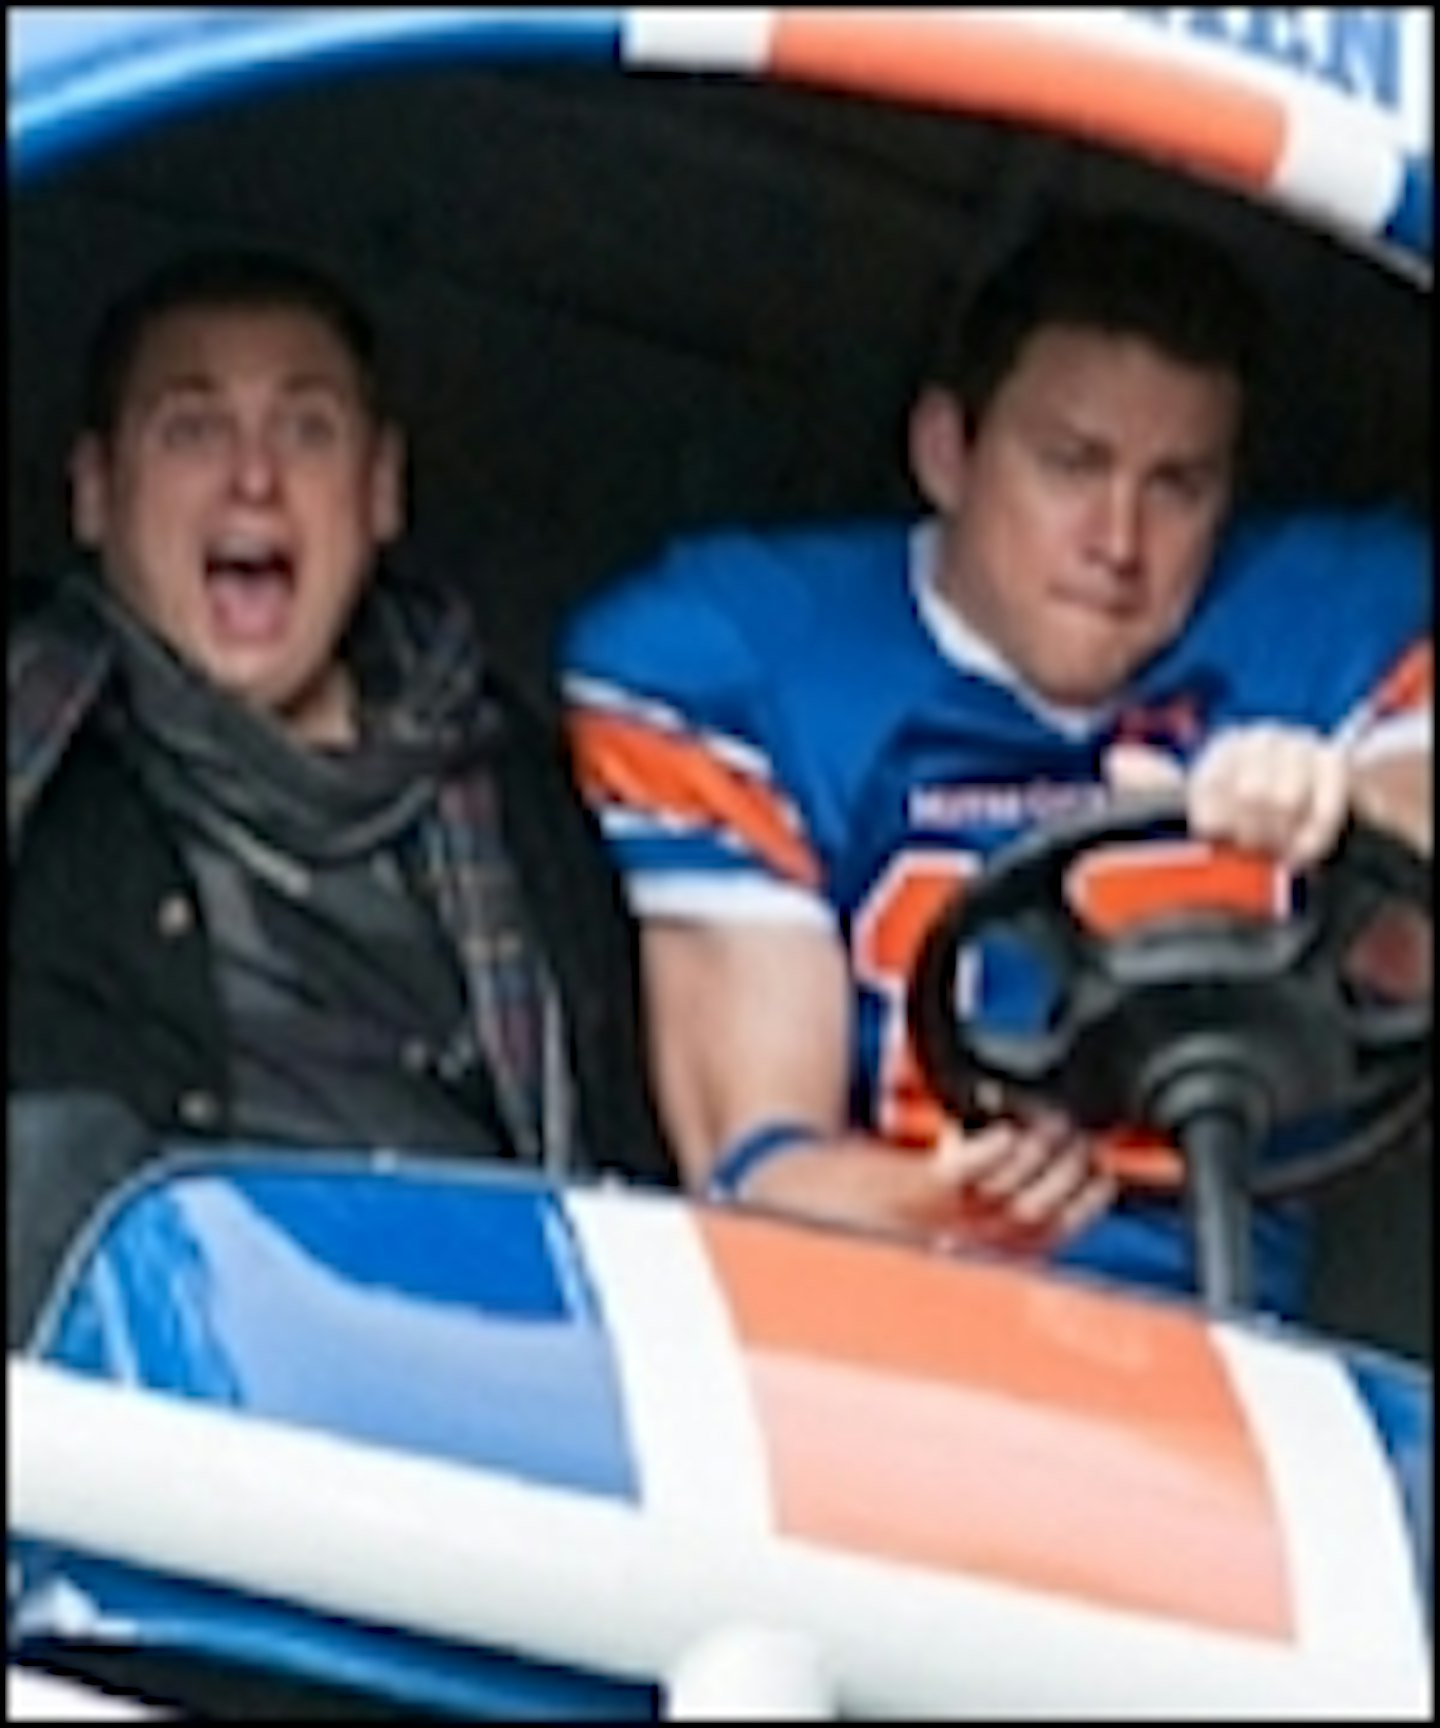 Latest Red Band Trailer For 22 Jump Street